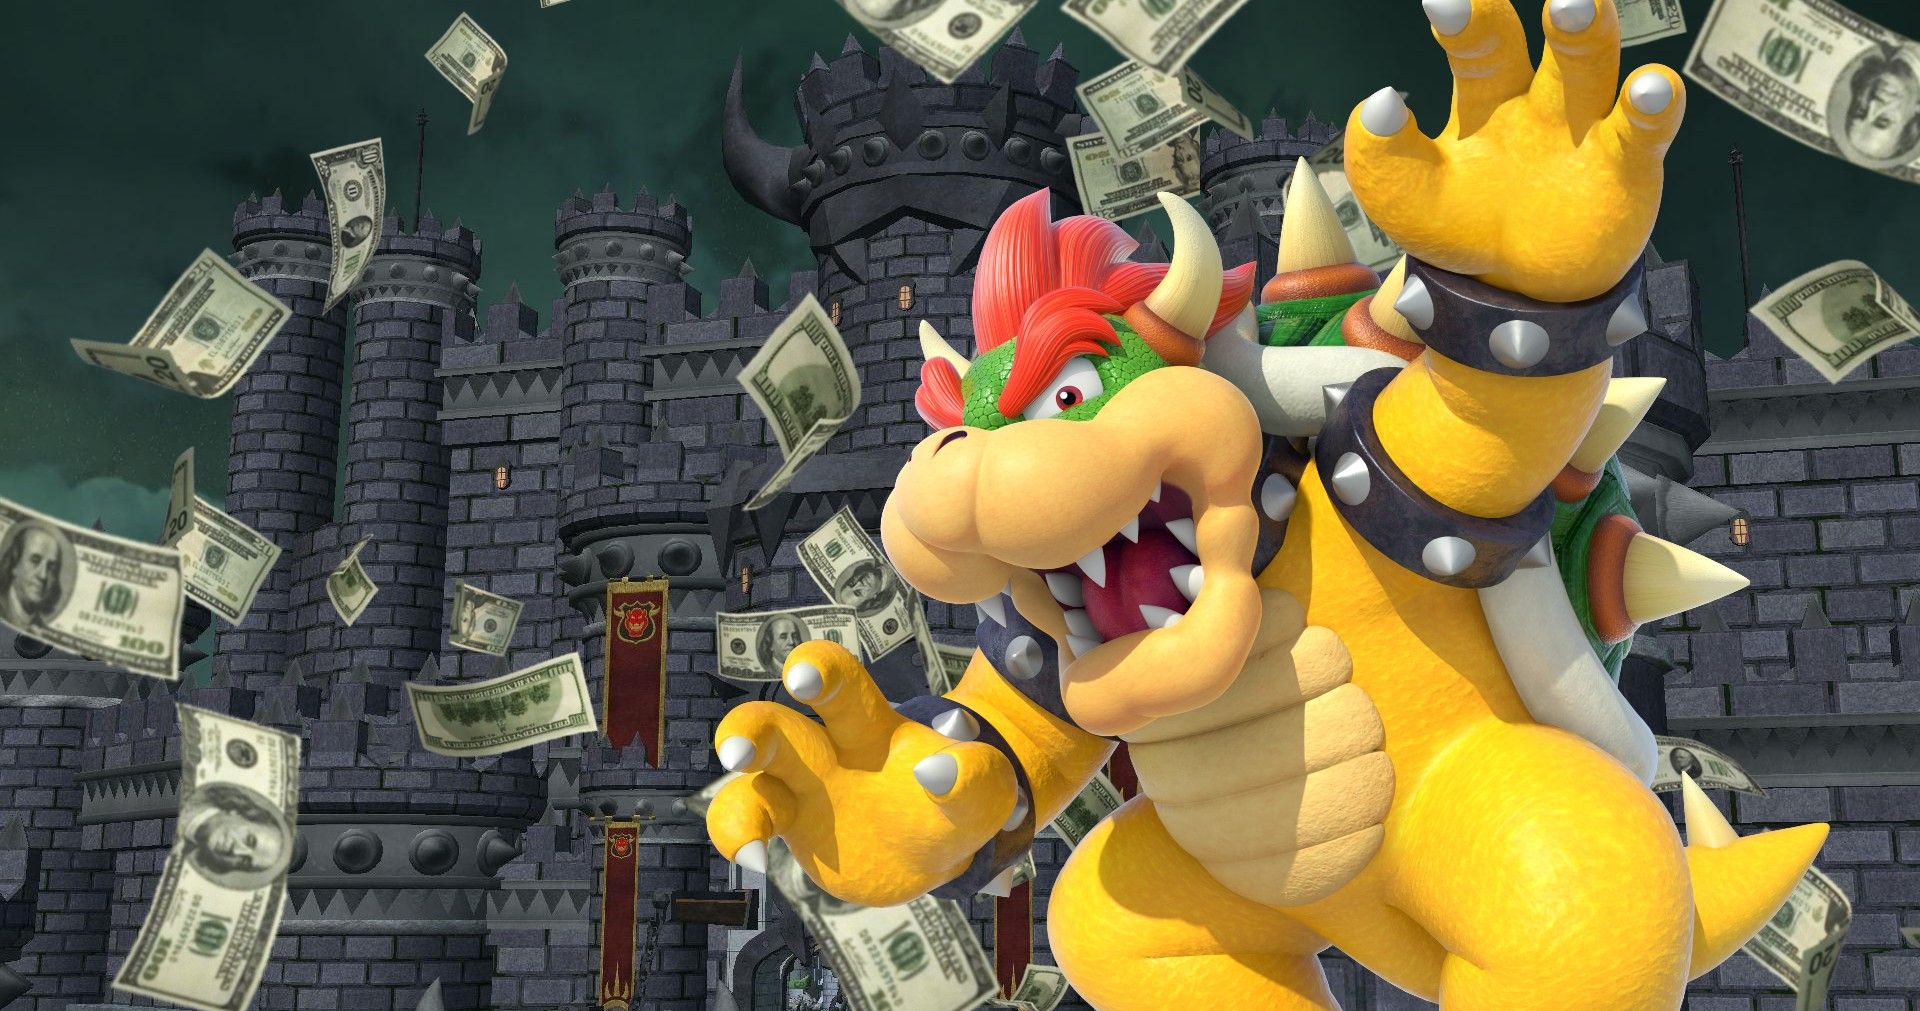 Bowsers In Front Of His Castle And Falling Money